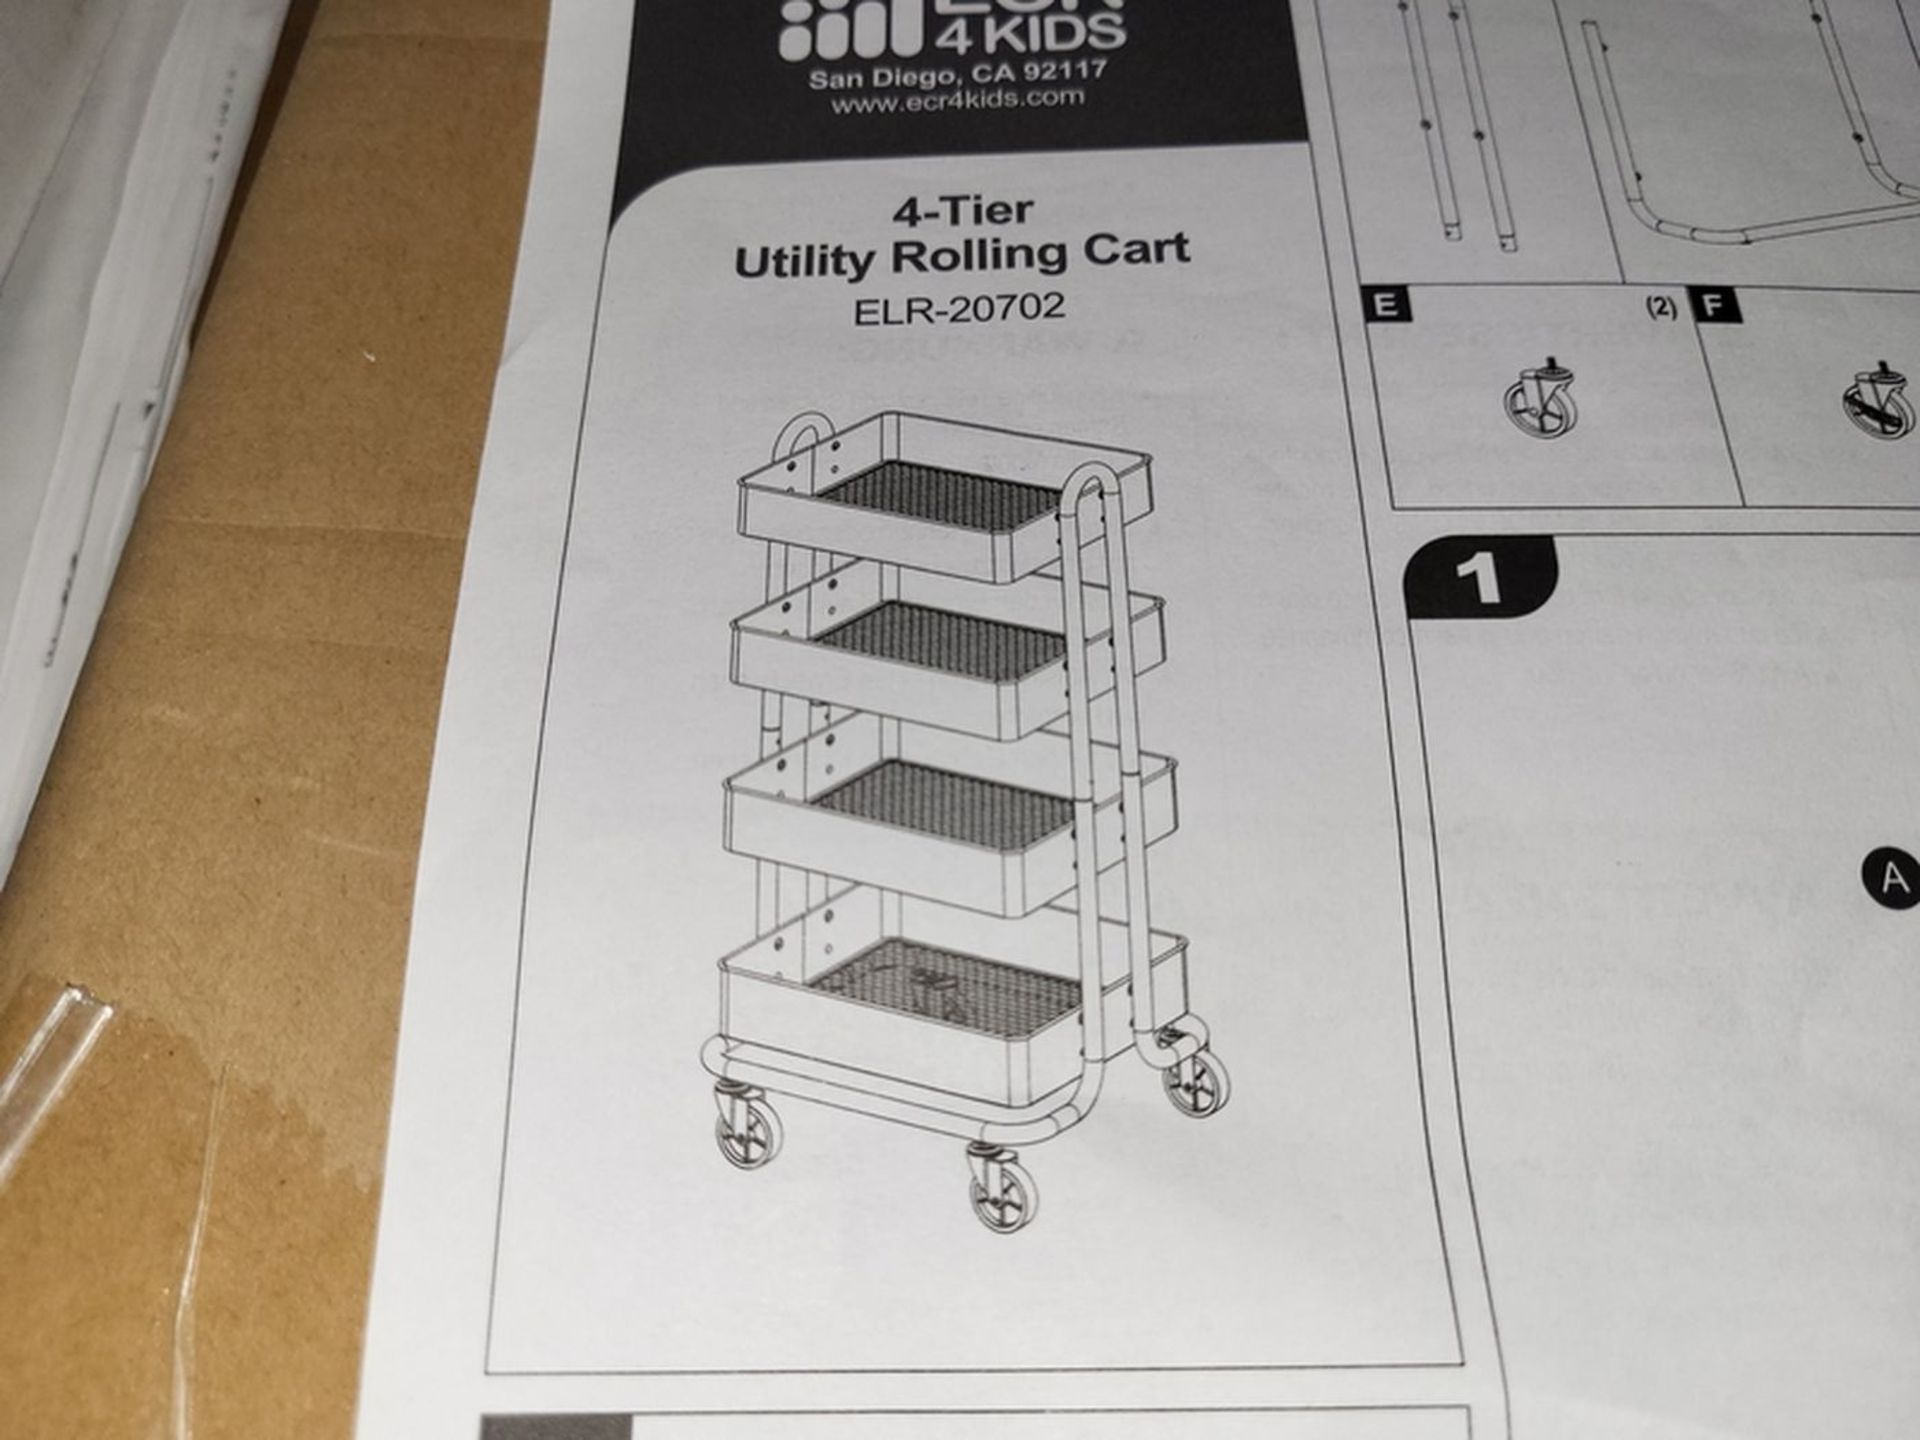 Lot - (2) ECR4KIDS Model ELR-20702-GY 4-Tier Utility Rolling Carts; Unused in Boxes - Image 3 of 3